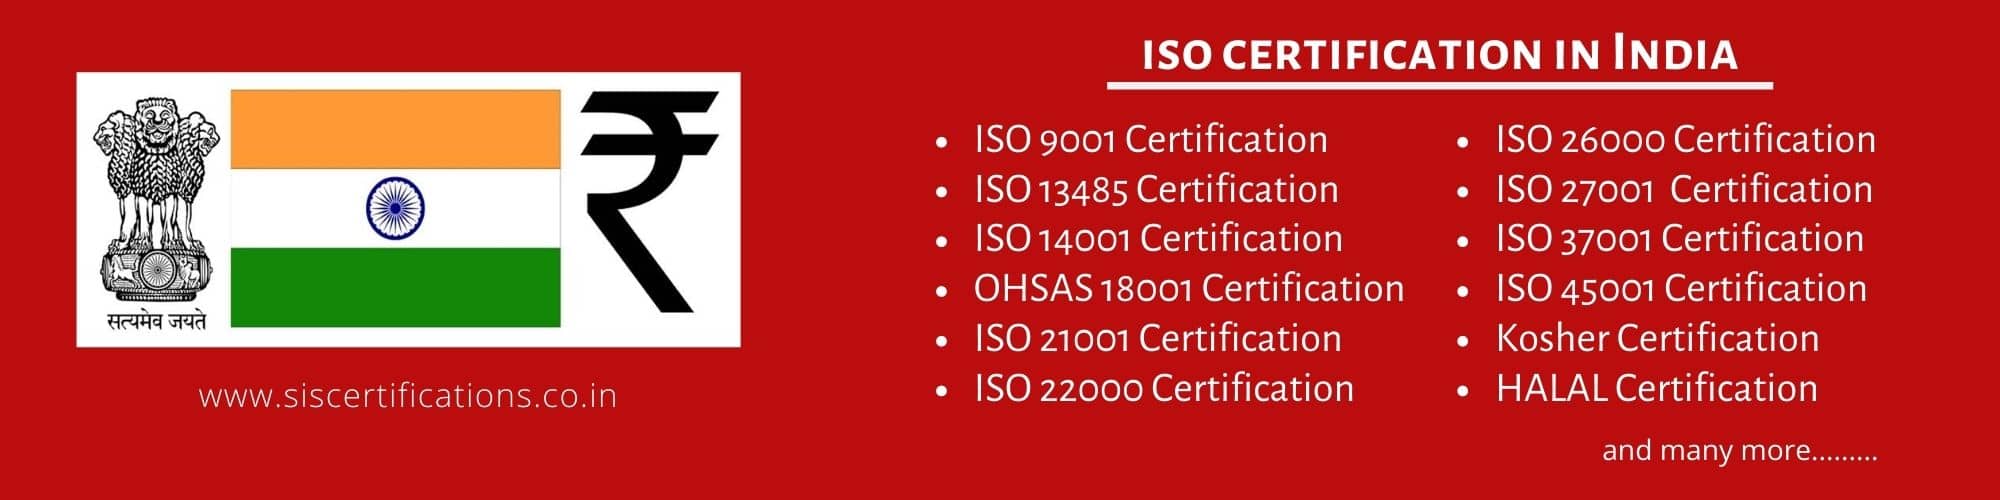 ISO Certification in India , process ISO Certification in India